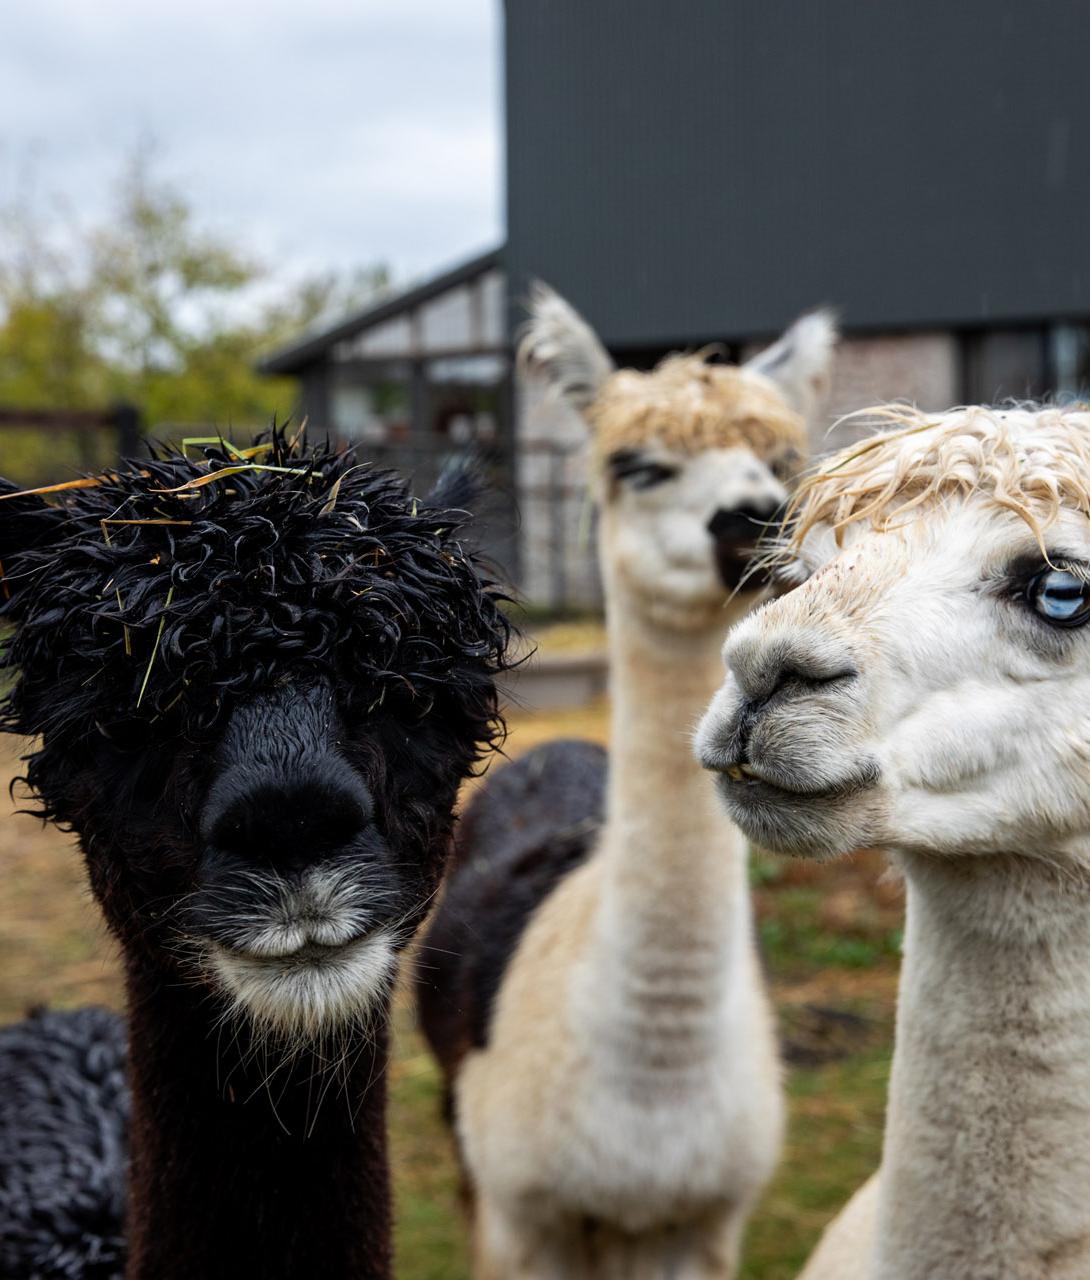 A black, smiling alpaca looking at the camera, surrounded by other alpacas